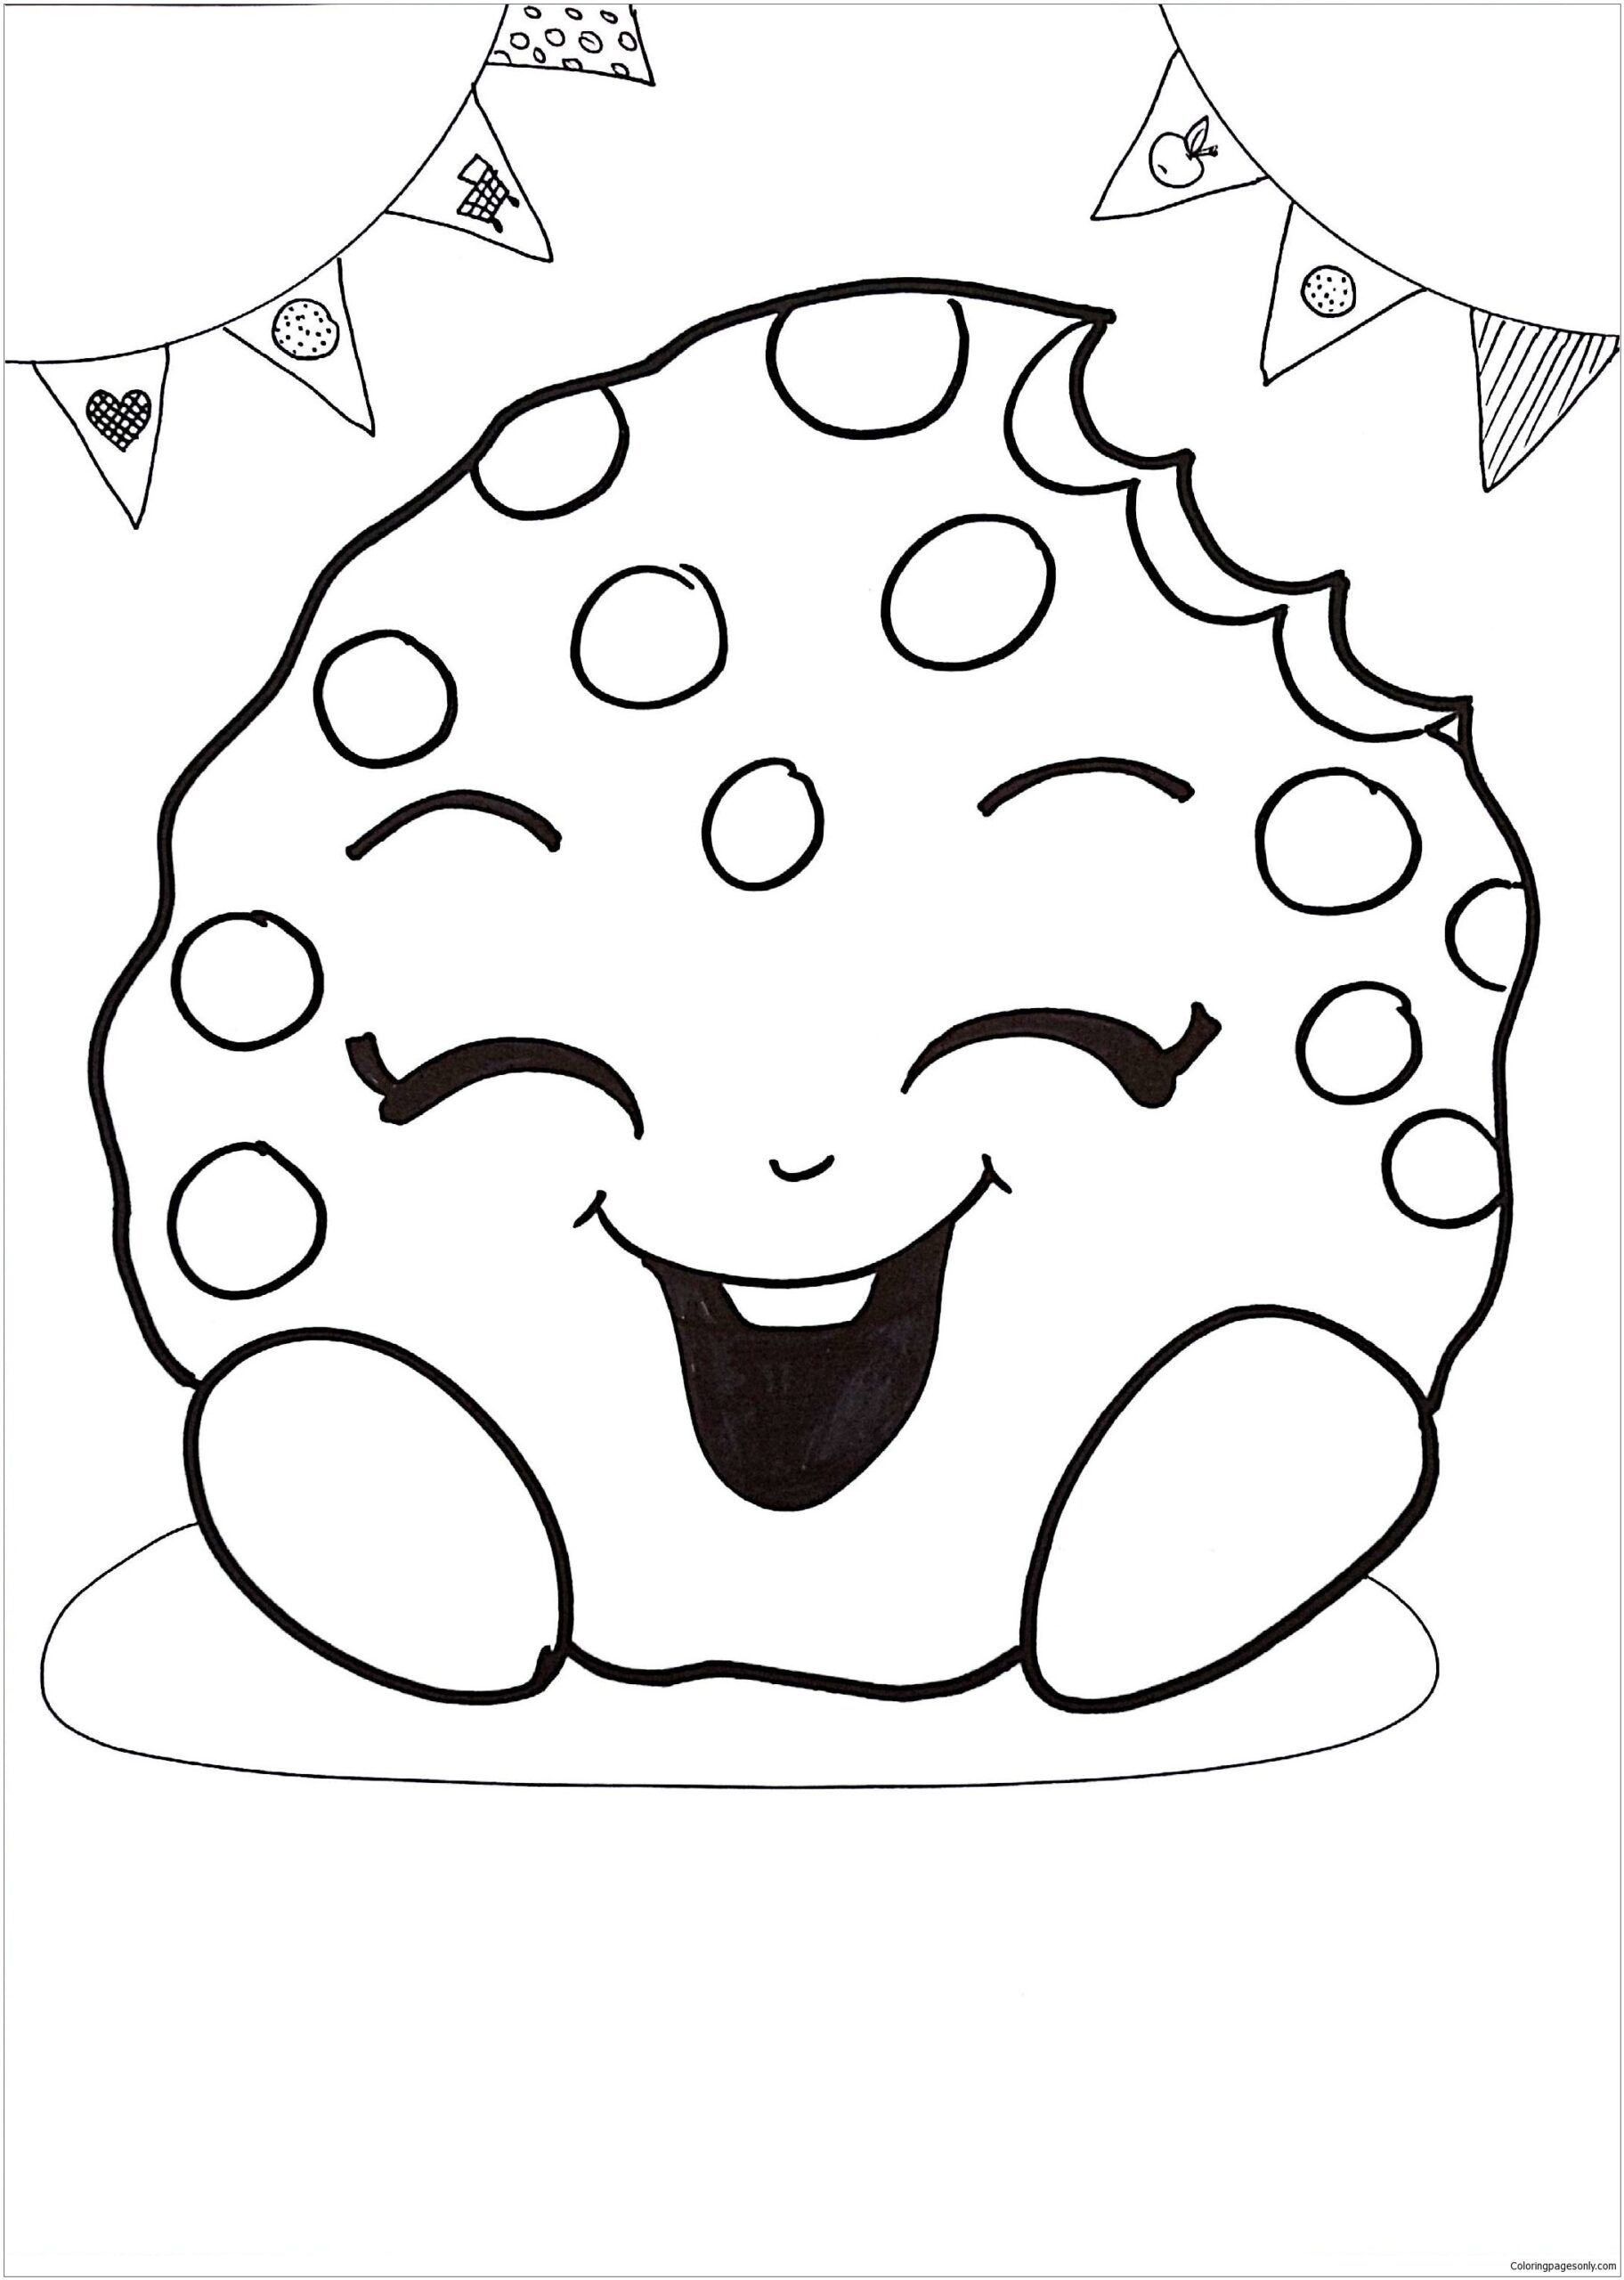 Freee cookie coloring pages pdf for kids